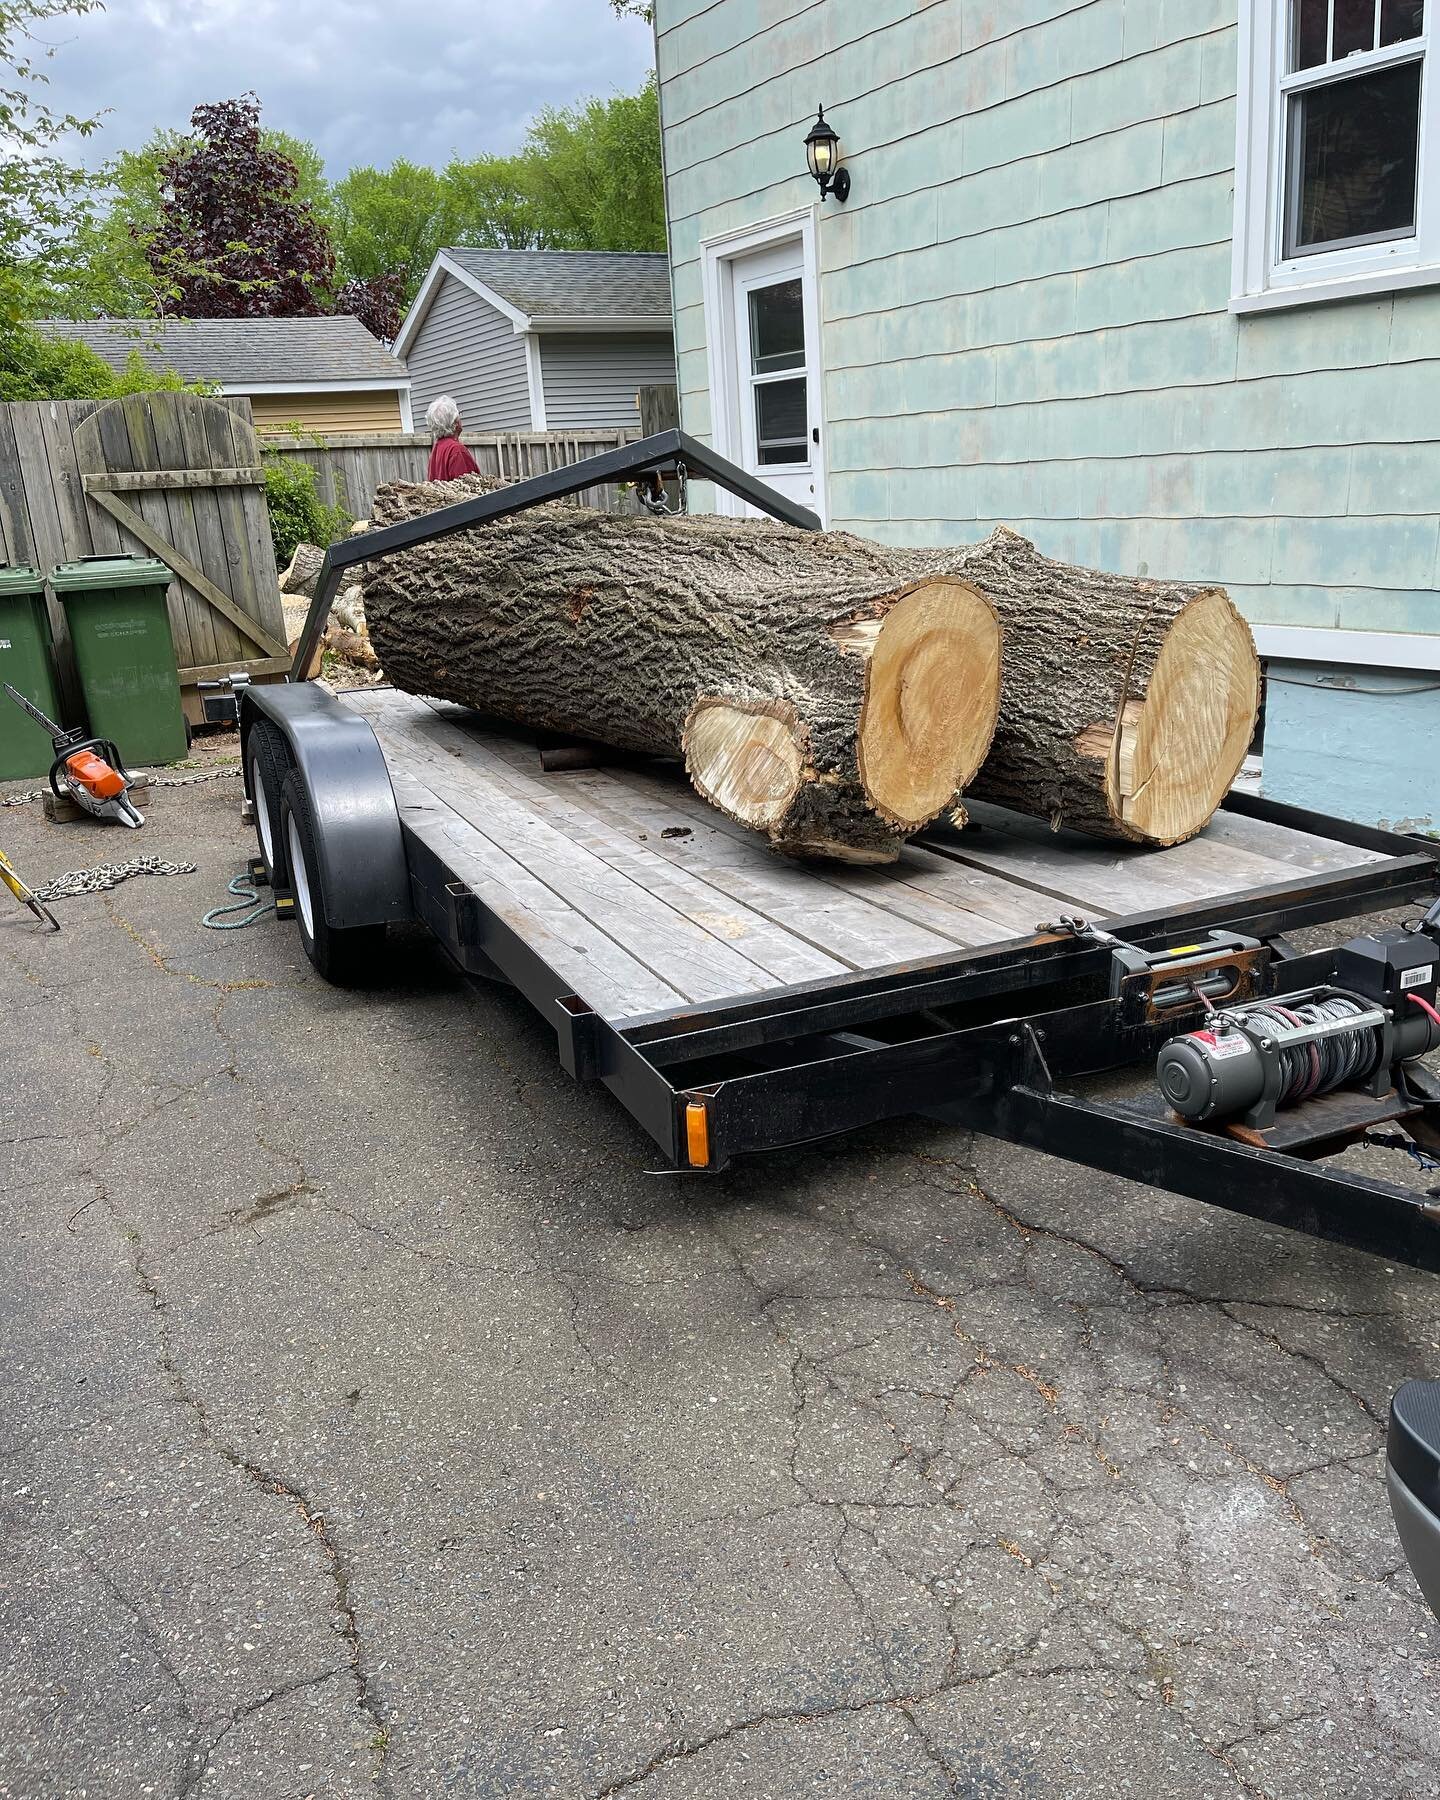 Pulled this beauty out of the North End  Halifax today.  Had to remove half a fence and shut down the street but it made it home. 

#sawmill #sawmillbusiness #woodpreneur #woodmizer #woodmizersawmills #nomiddleman #forestry #forestryequipment #wood #